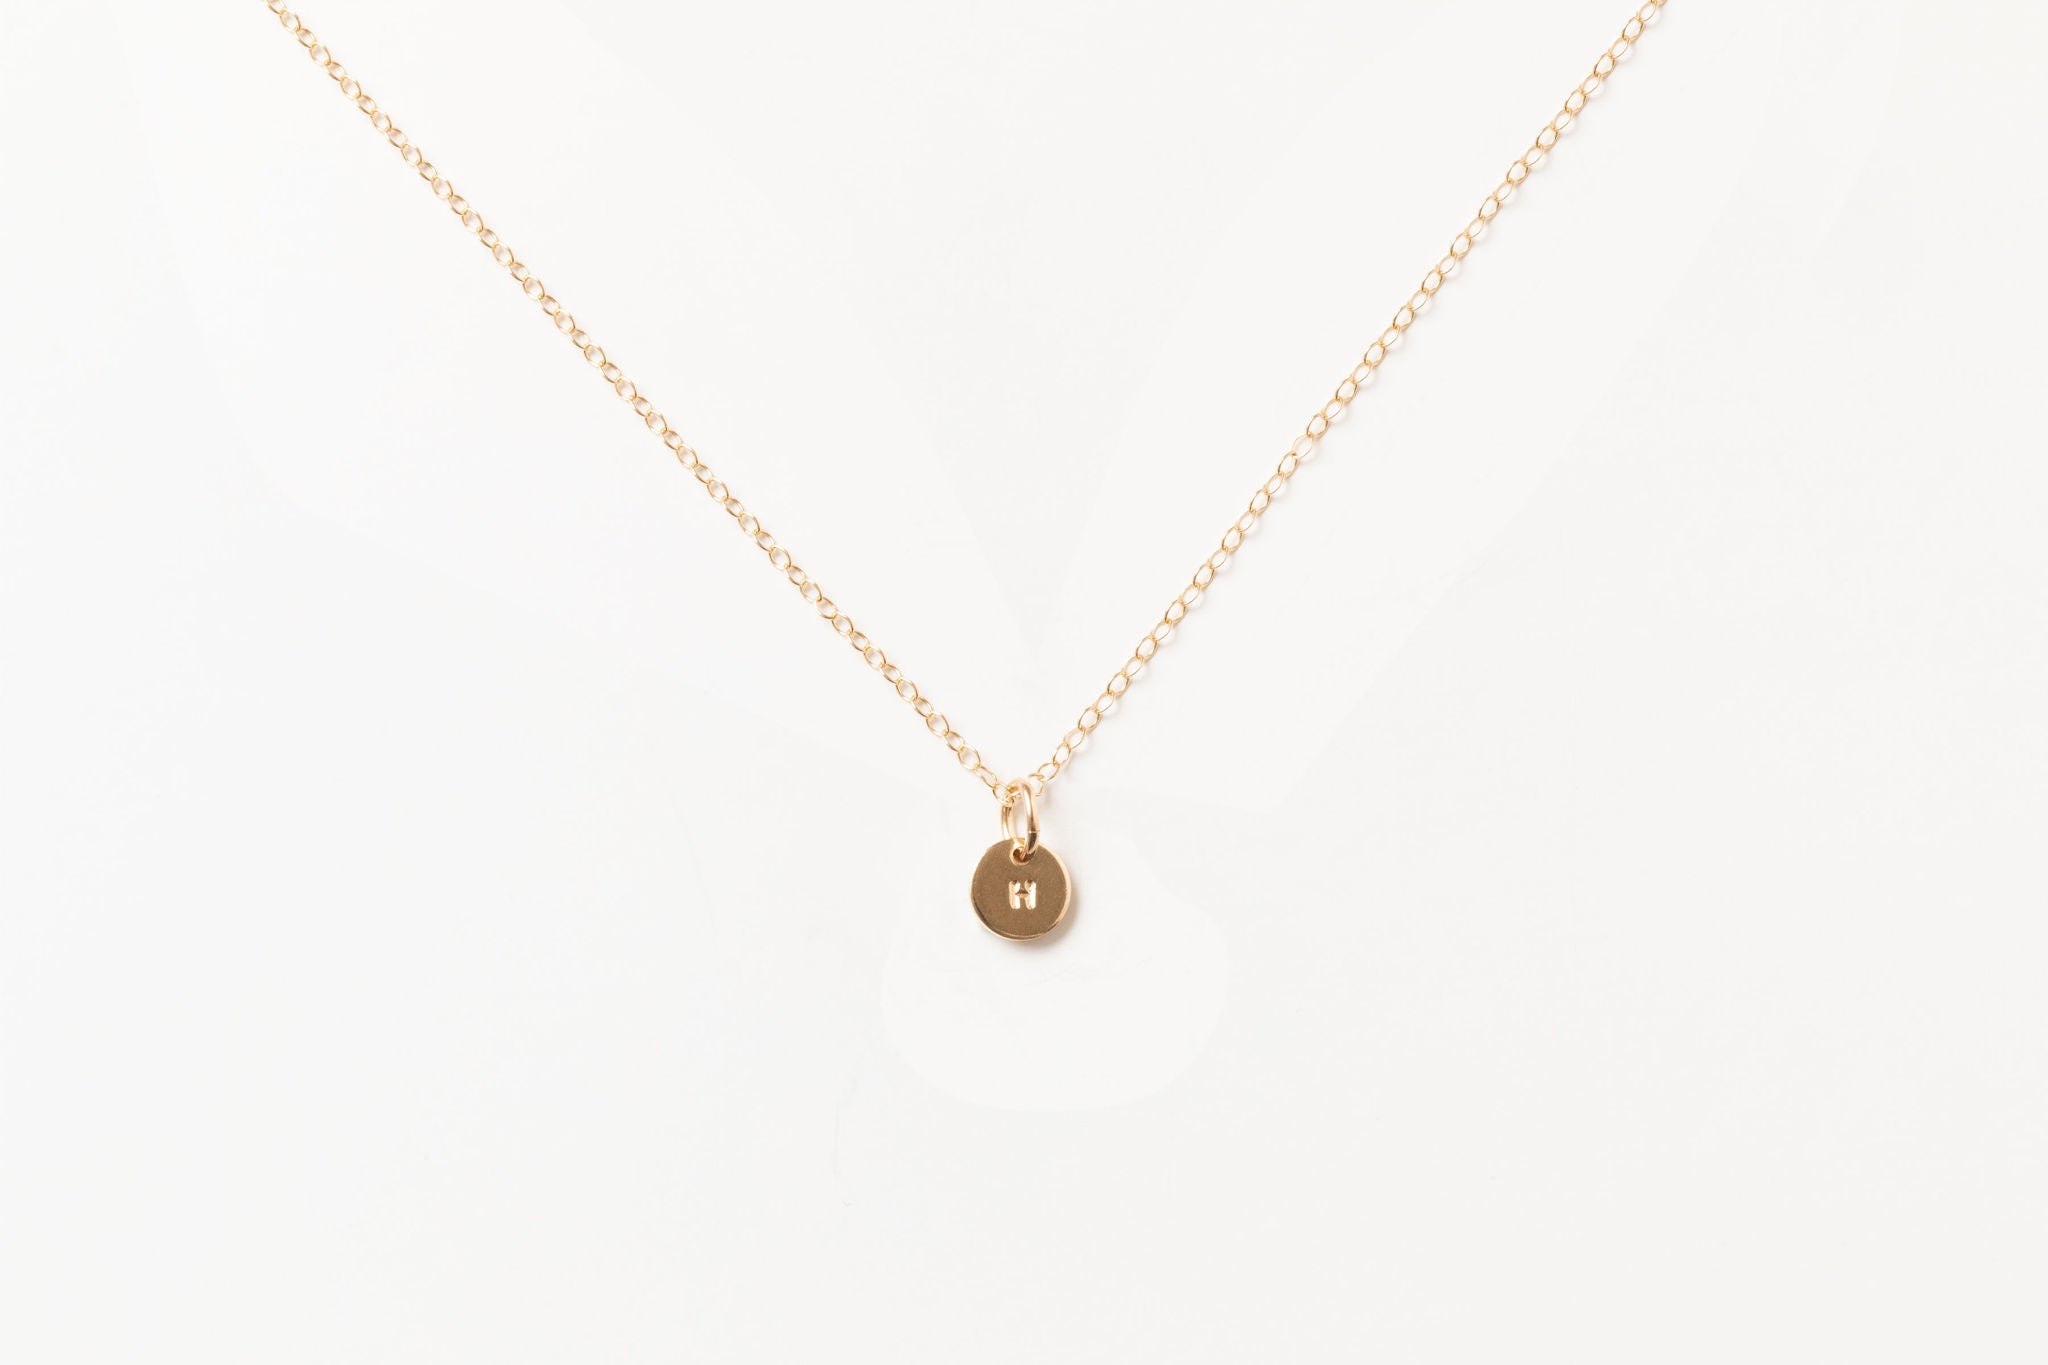 Tiny Letter Charm Necklace